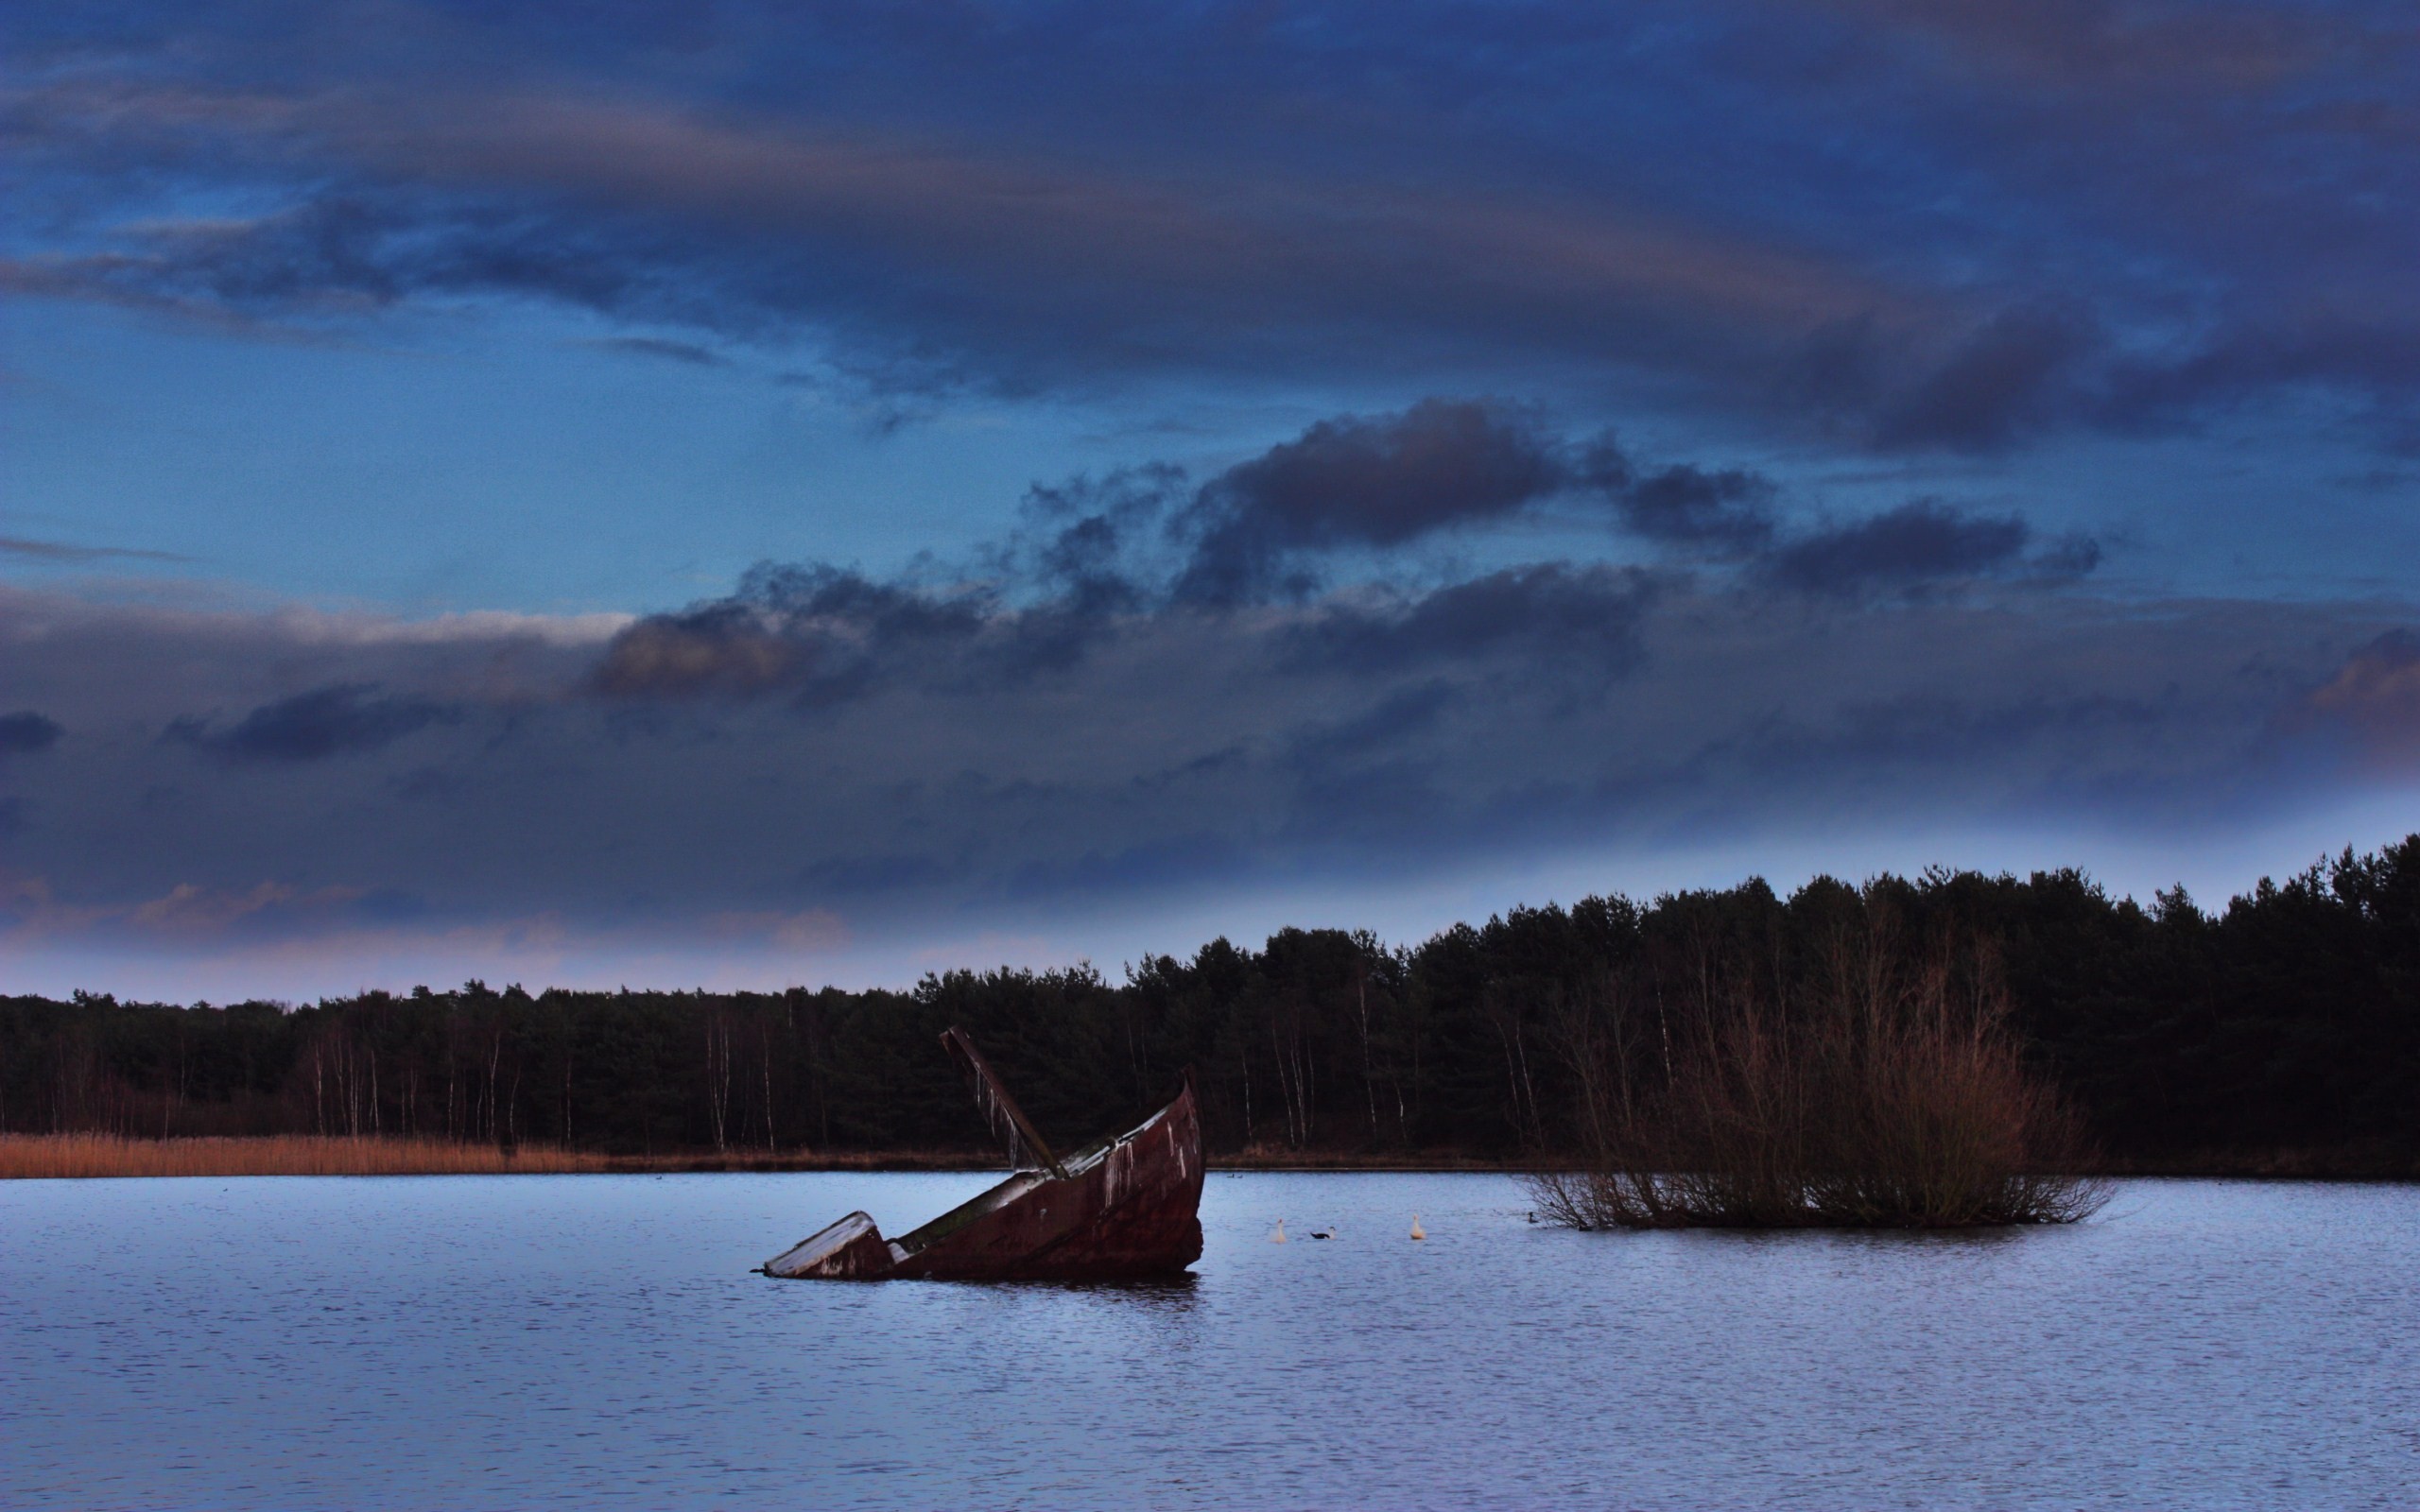 General 2560x1600 lake nature landscape forest clouds shipwreck water trees rust wreck